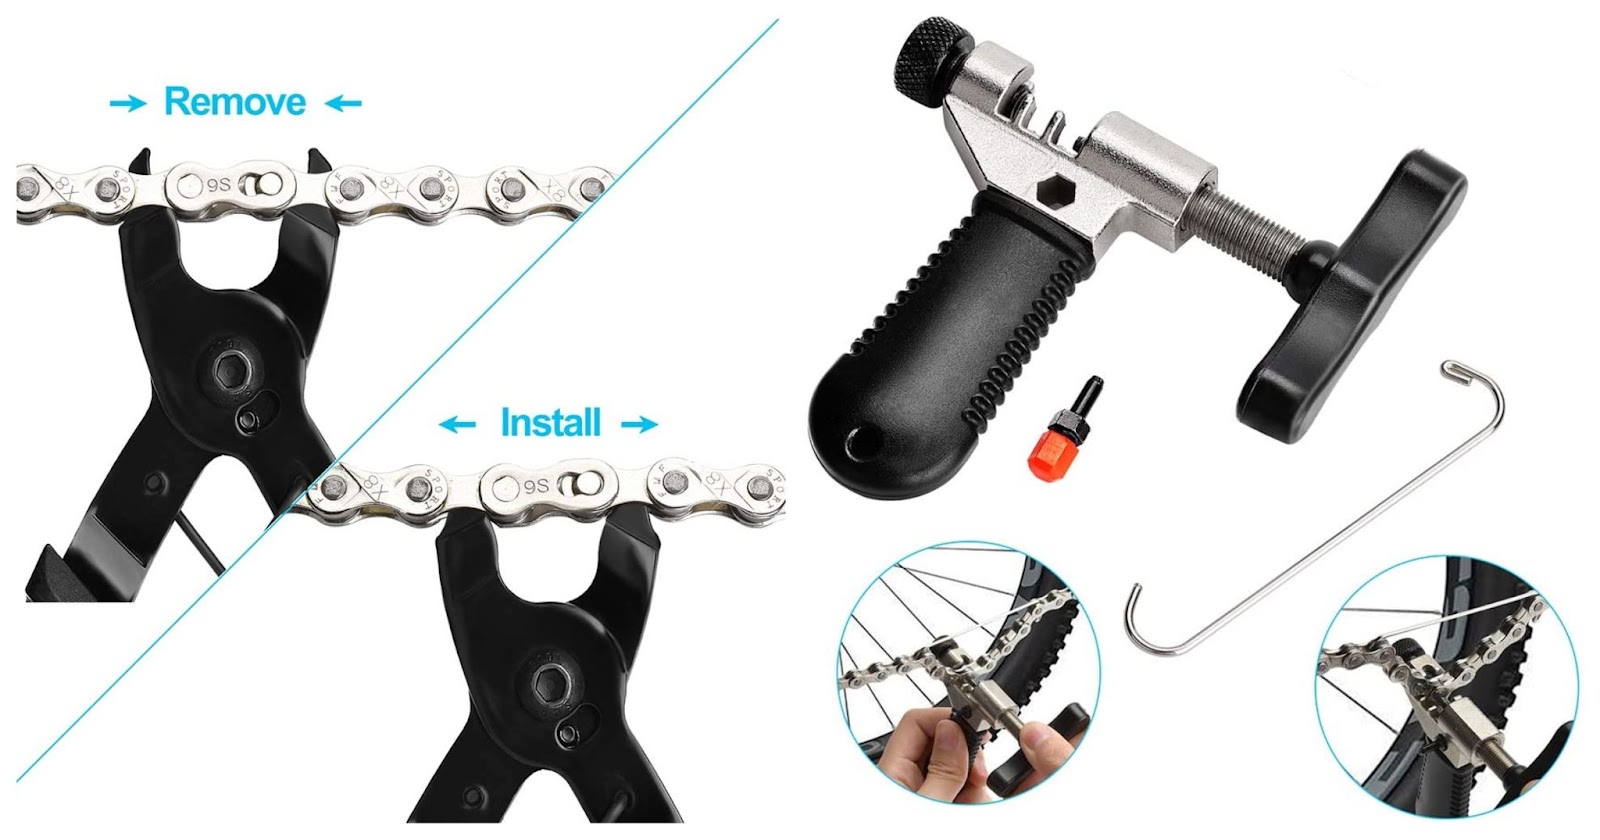 A chain tool is used to split a mountain bike chain and to reattach it.